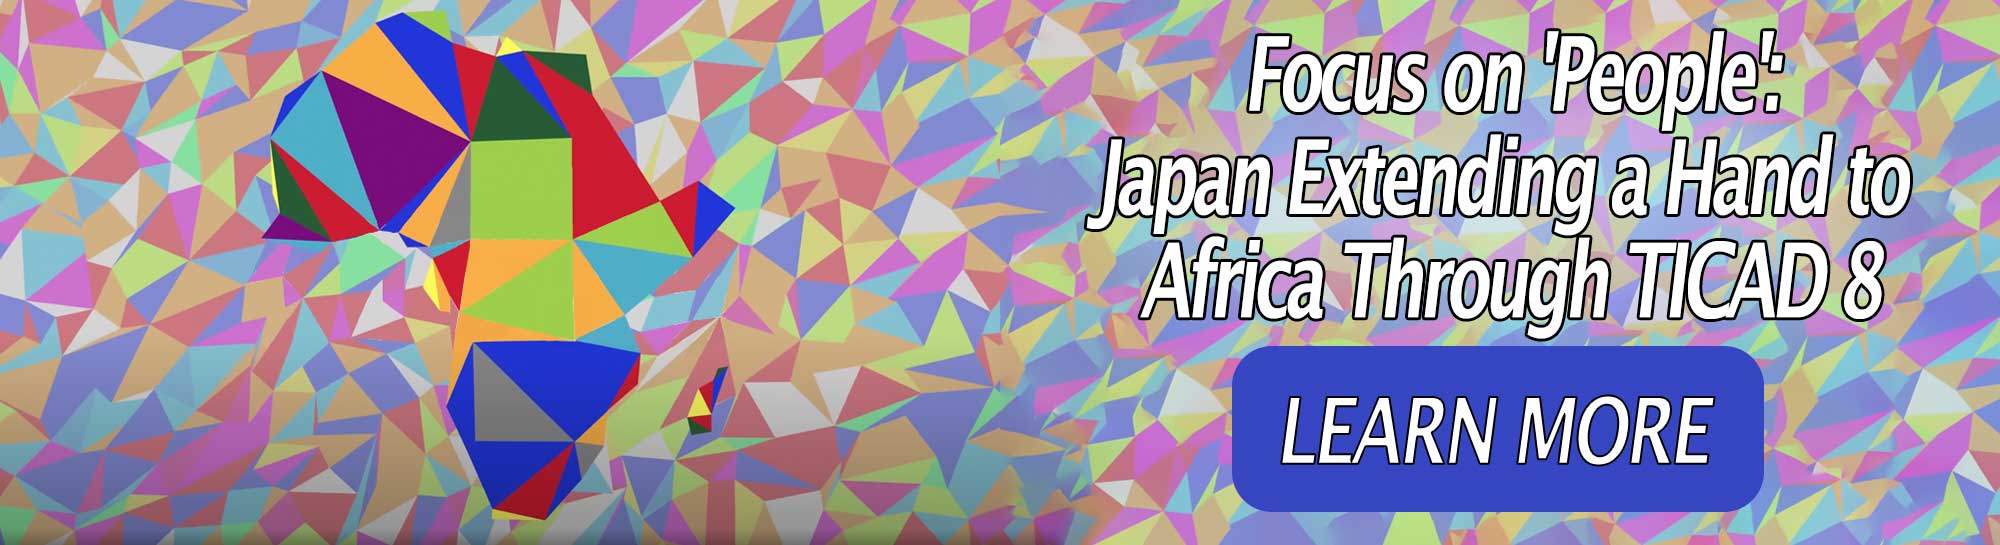 Focus on “people”: Japan reaches out to Africa through TICAD 8